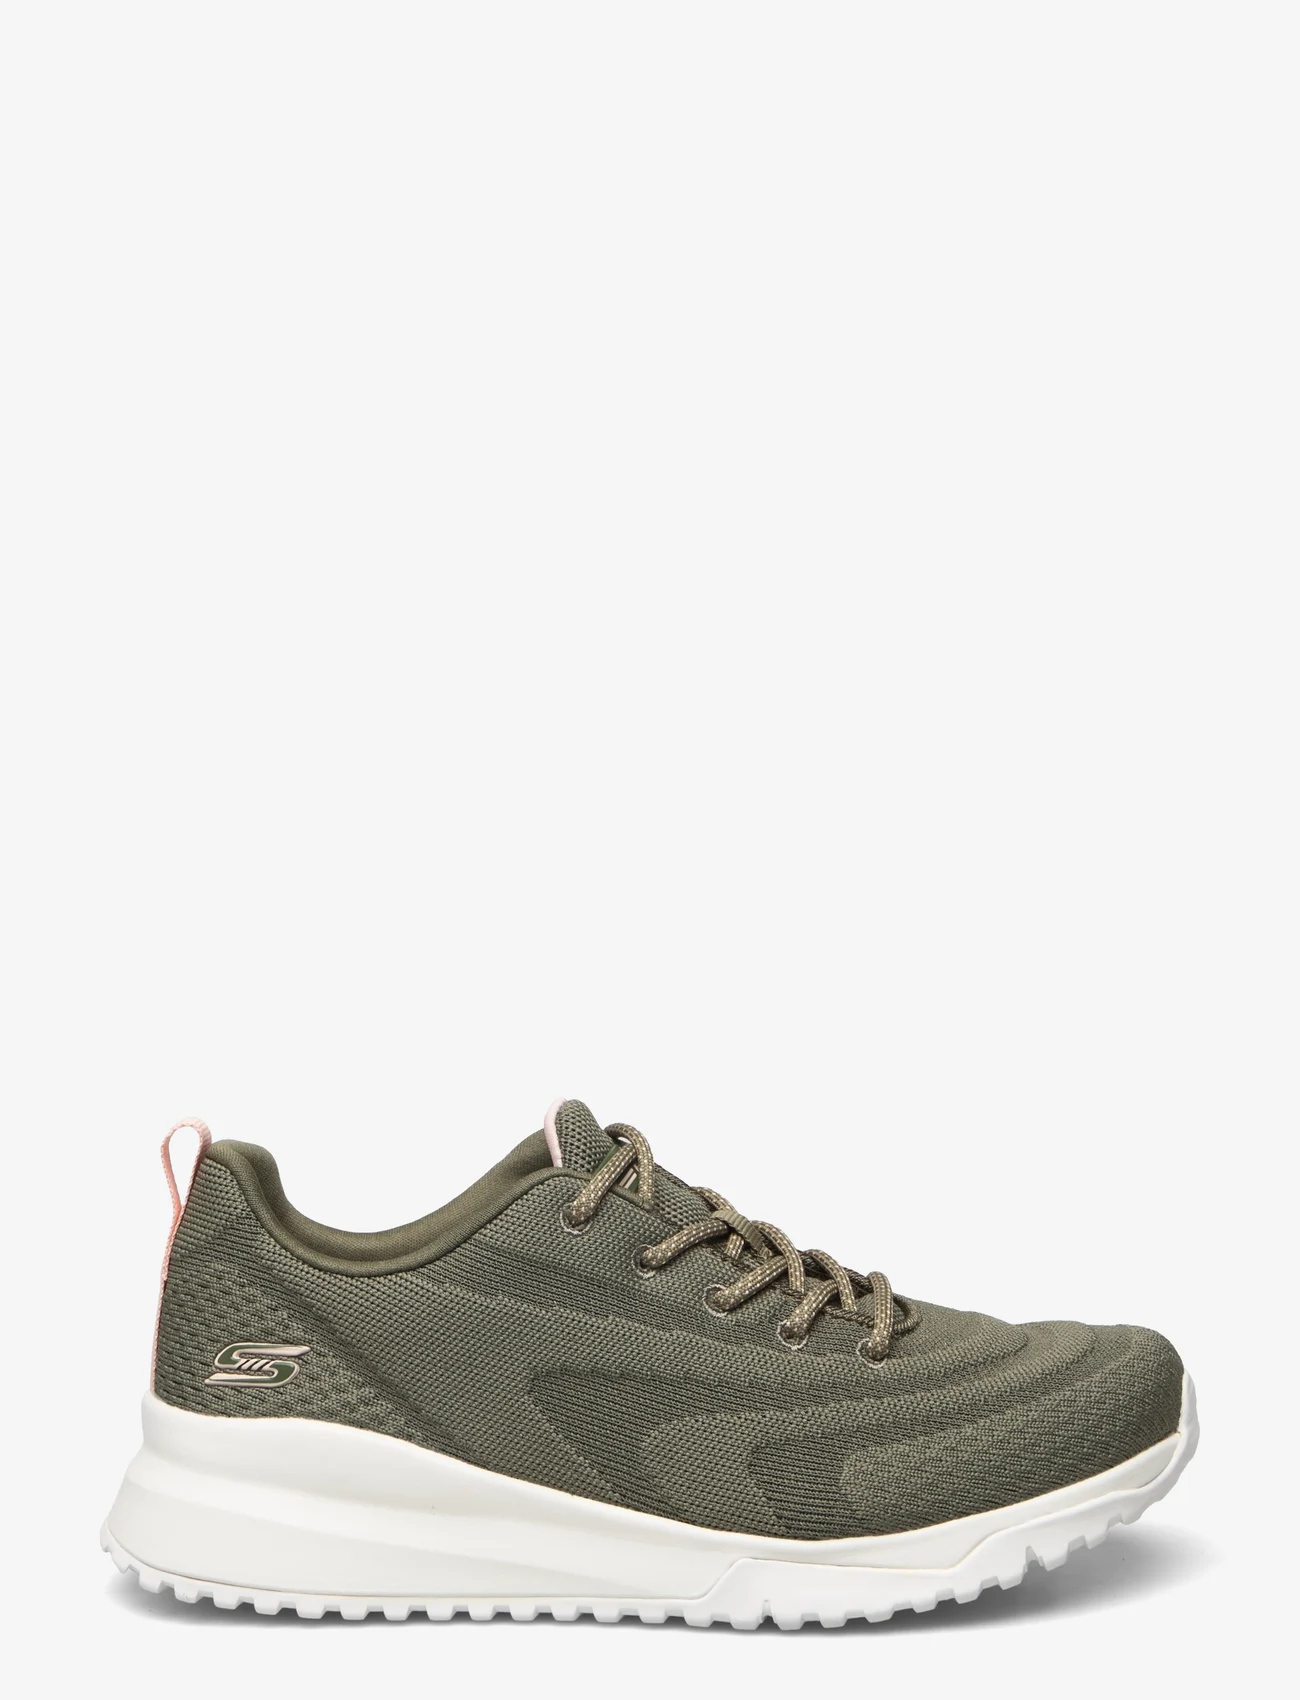 Skechers - Womens BOBS Squad 3 - low top sneakers - olv olive - 1